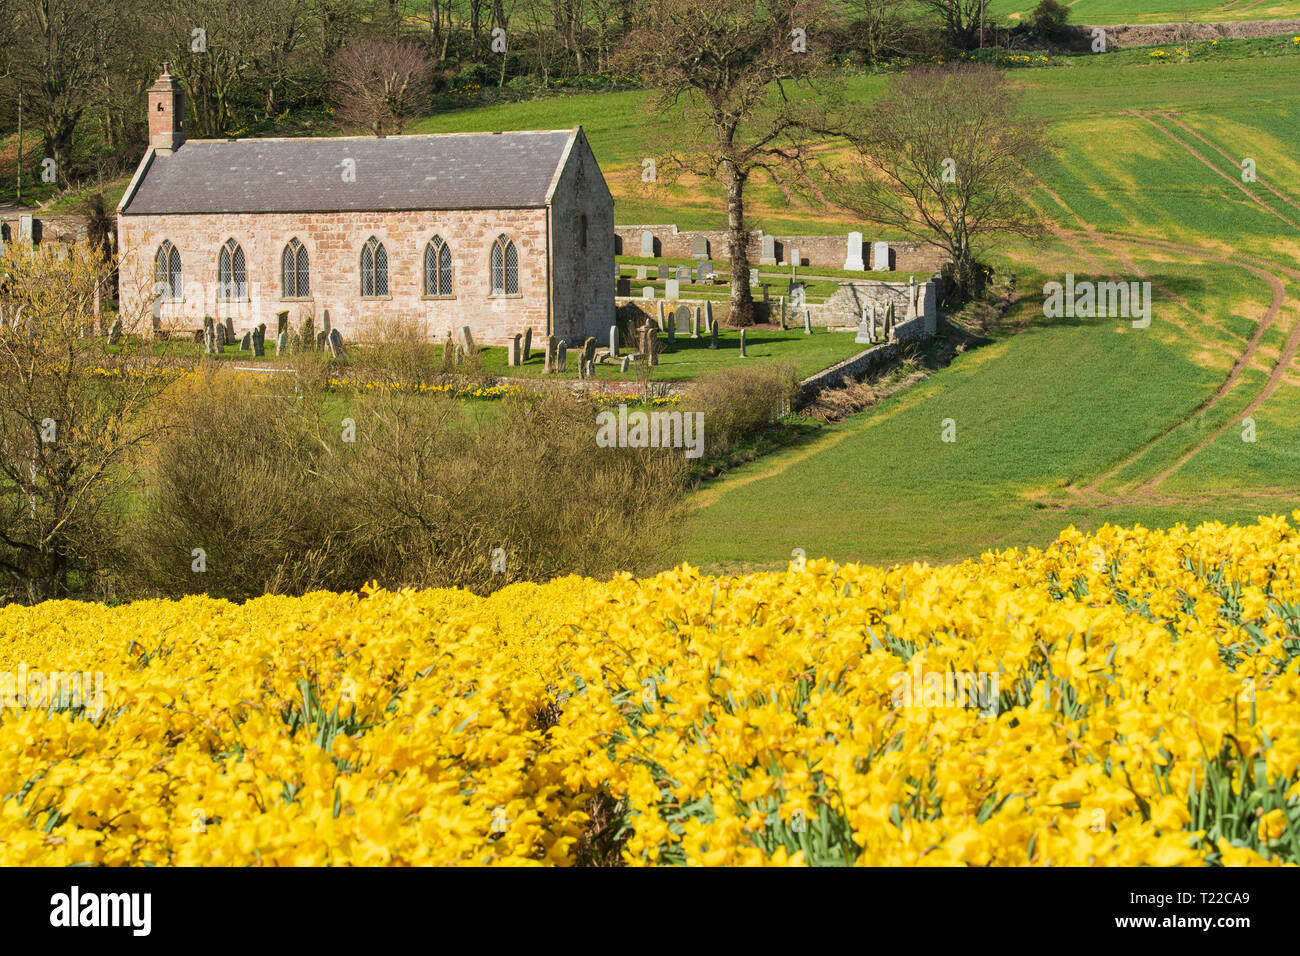 Kinneff Old Church with a field of daffodils in the foreground. Stock Photo